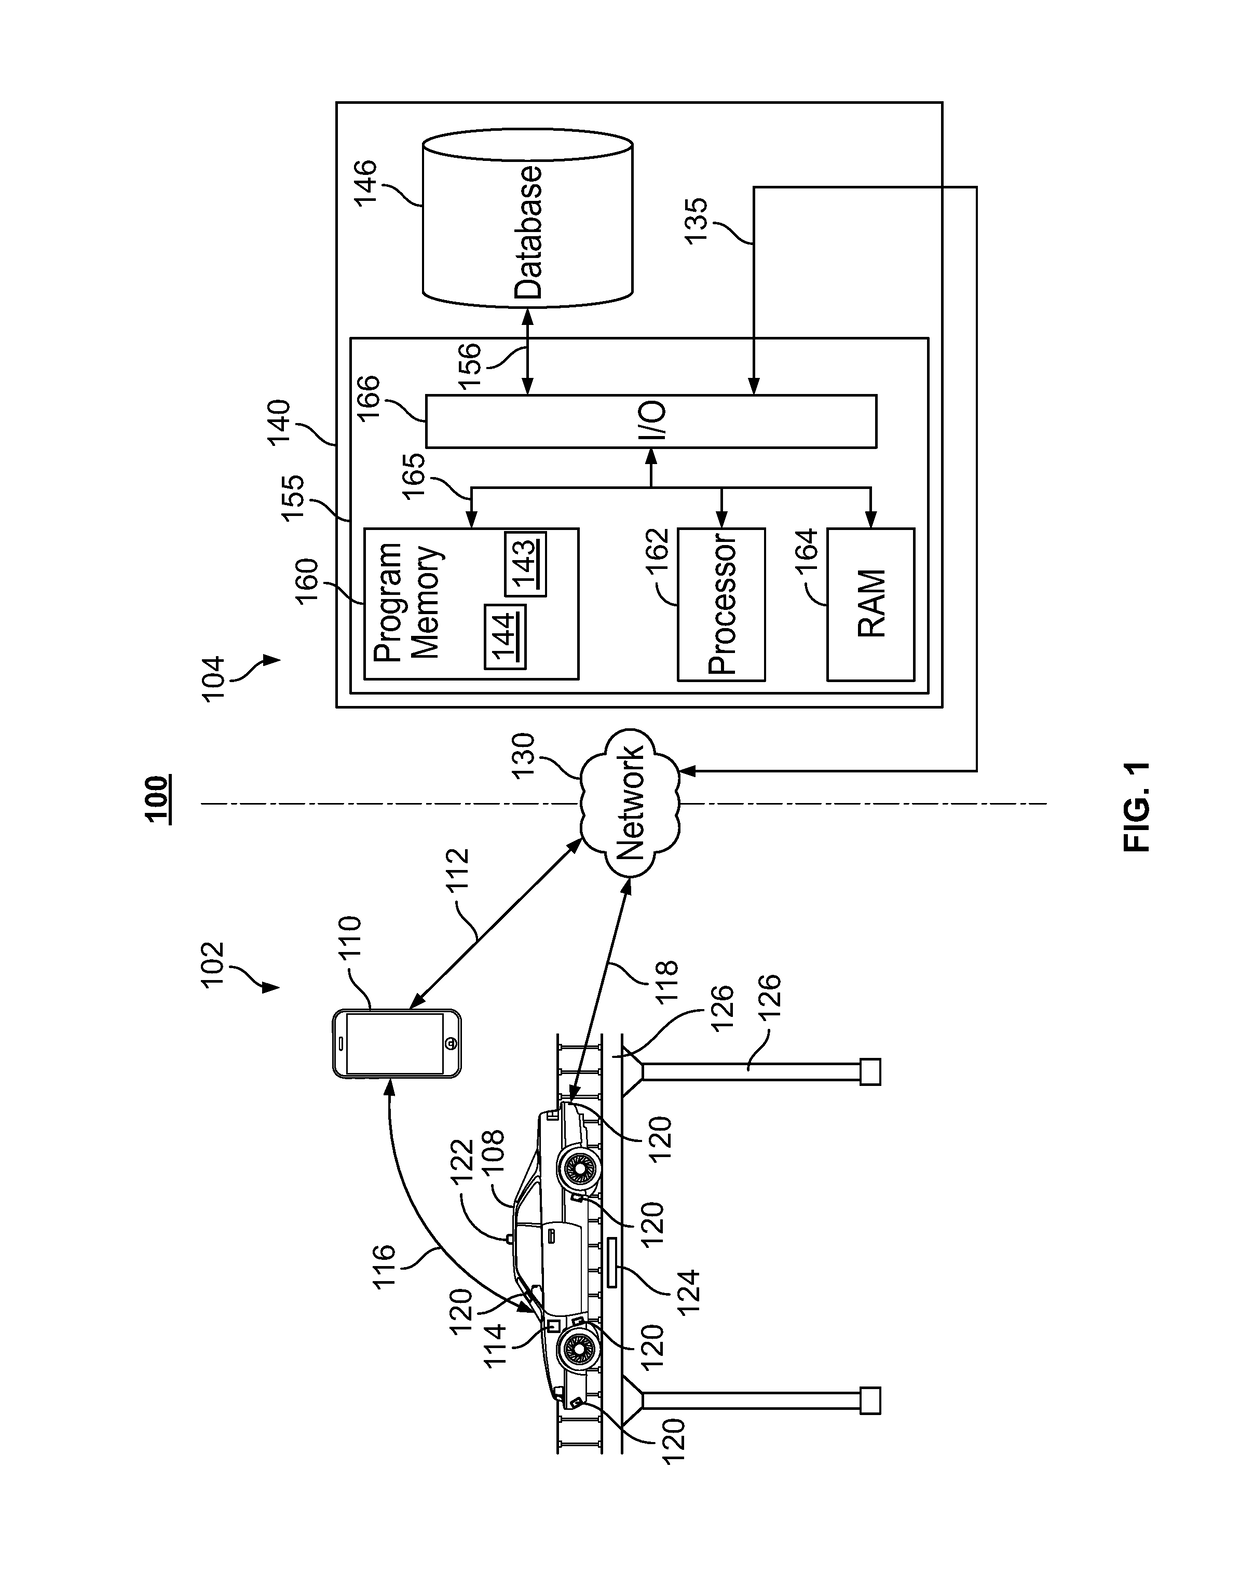 Traffic Risk Avoidance for a Route Selection System